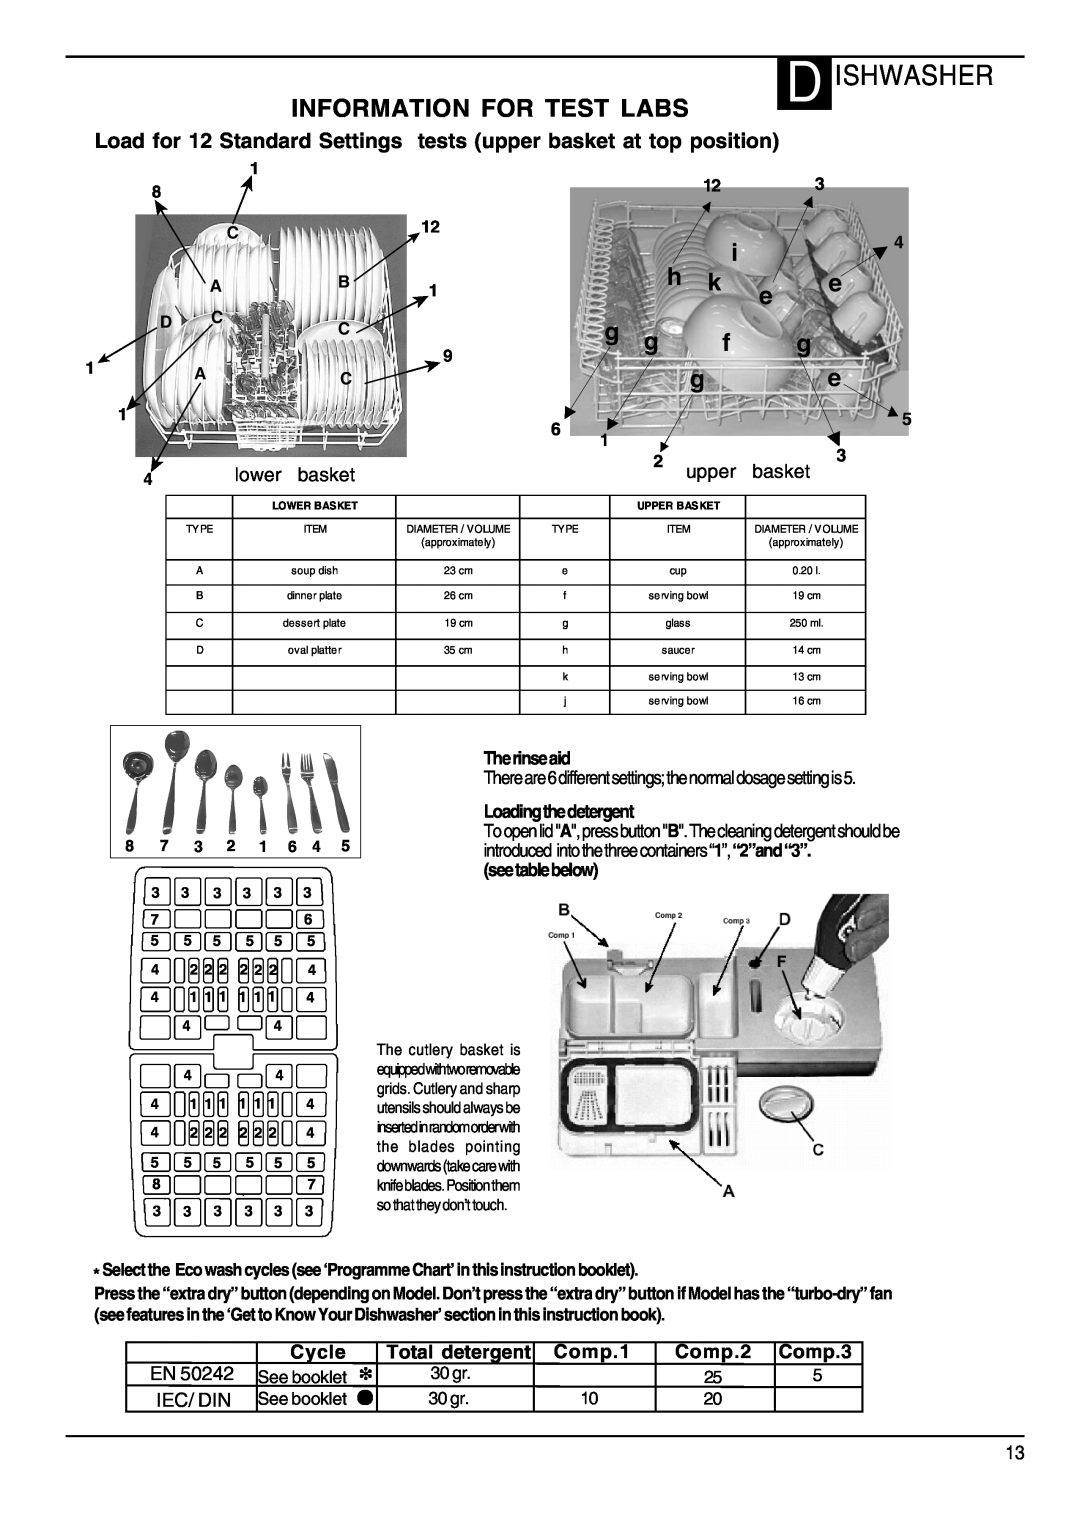 Hotpoint DWF40 manual Information For Test Labs, Ishwasher 